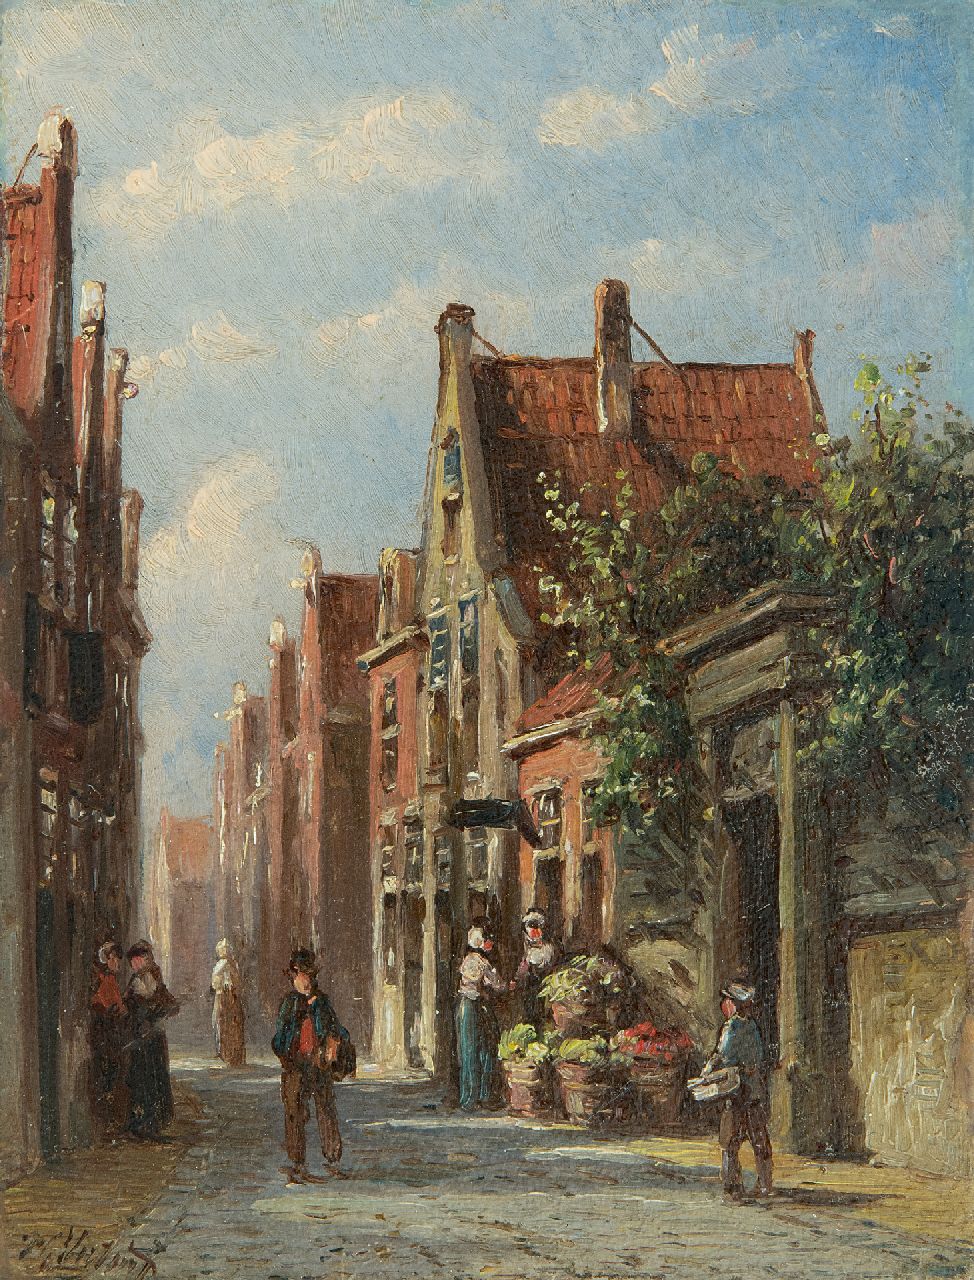 Vertin P.G.  | Petrus Gerardus Vertin | Paintings offered for sale | A sunny street with vegetable seller, oil on panel 13.4 x 10.2 cm, signed l.l.